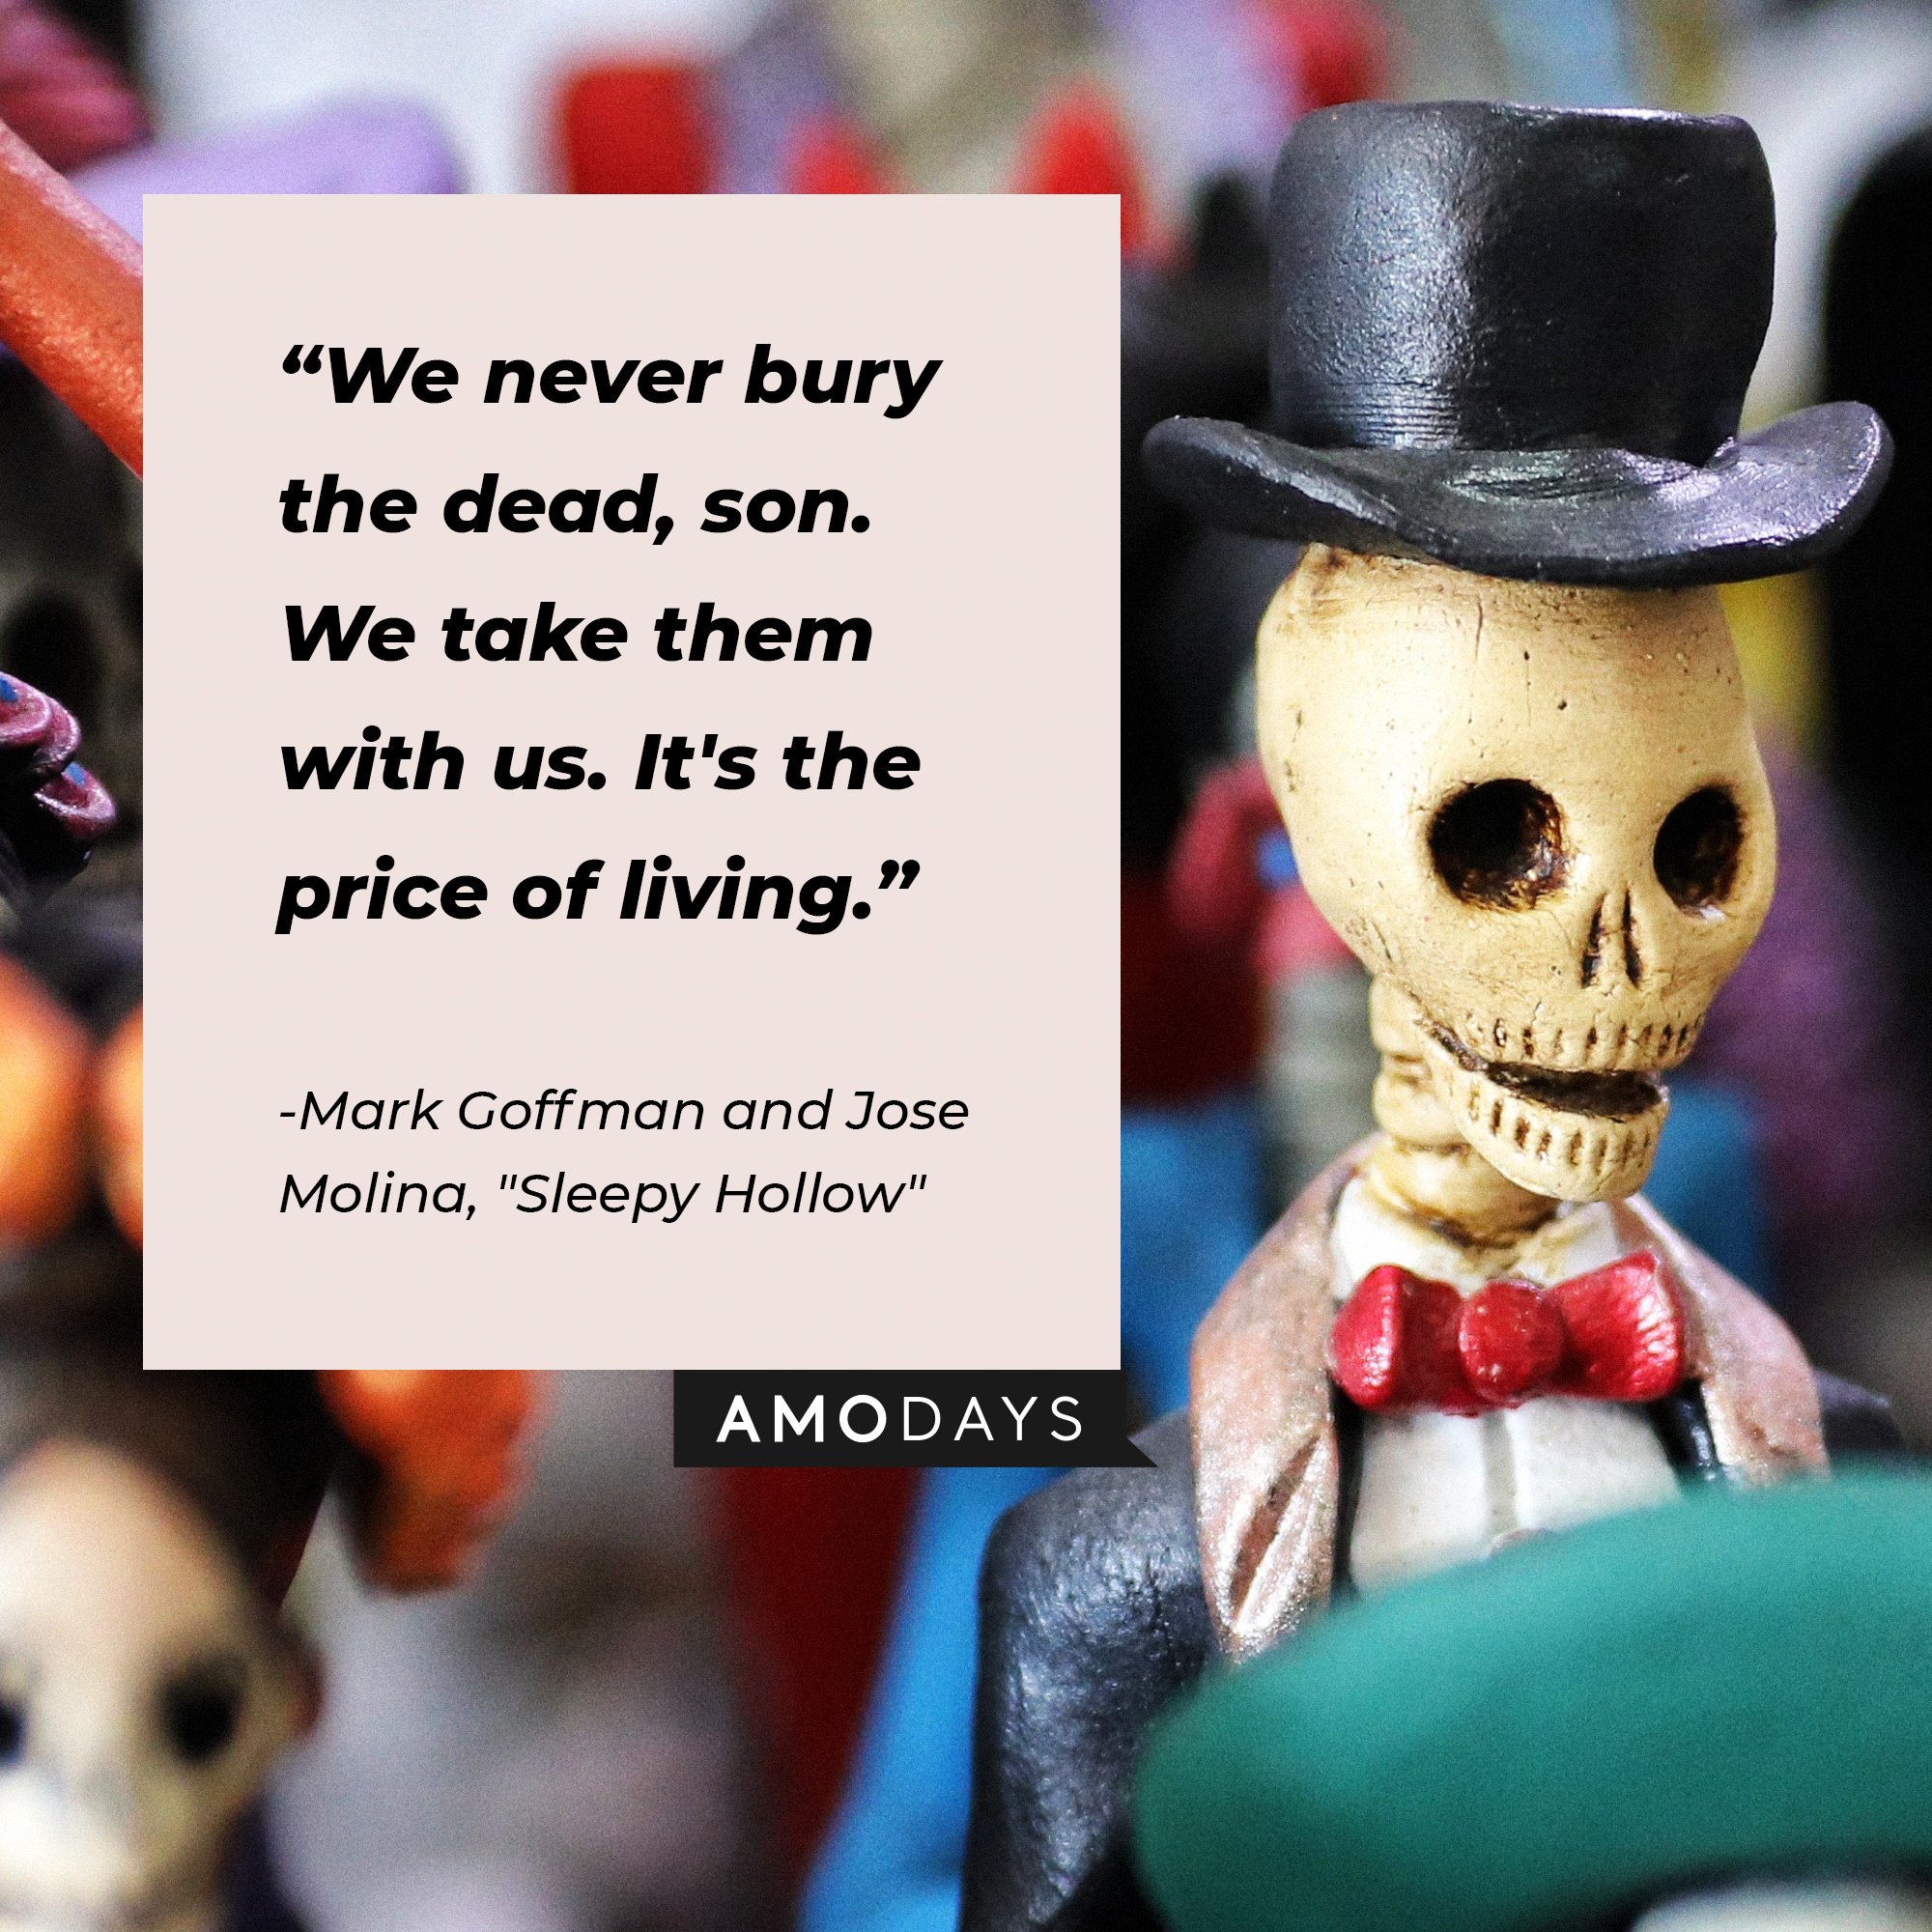  Mark Goffman and Jose Molinas’ quote from  "Sleepy Hollow":  "We never bury the dead, son. We take them with us. It's the price of living." | Image: AmoDays  